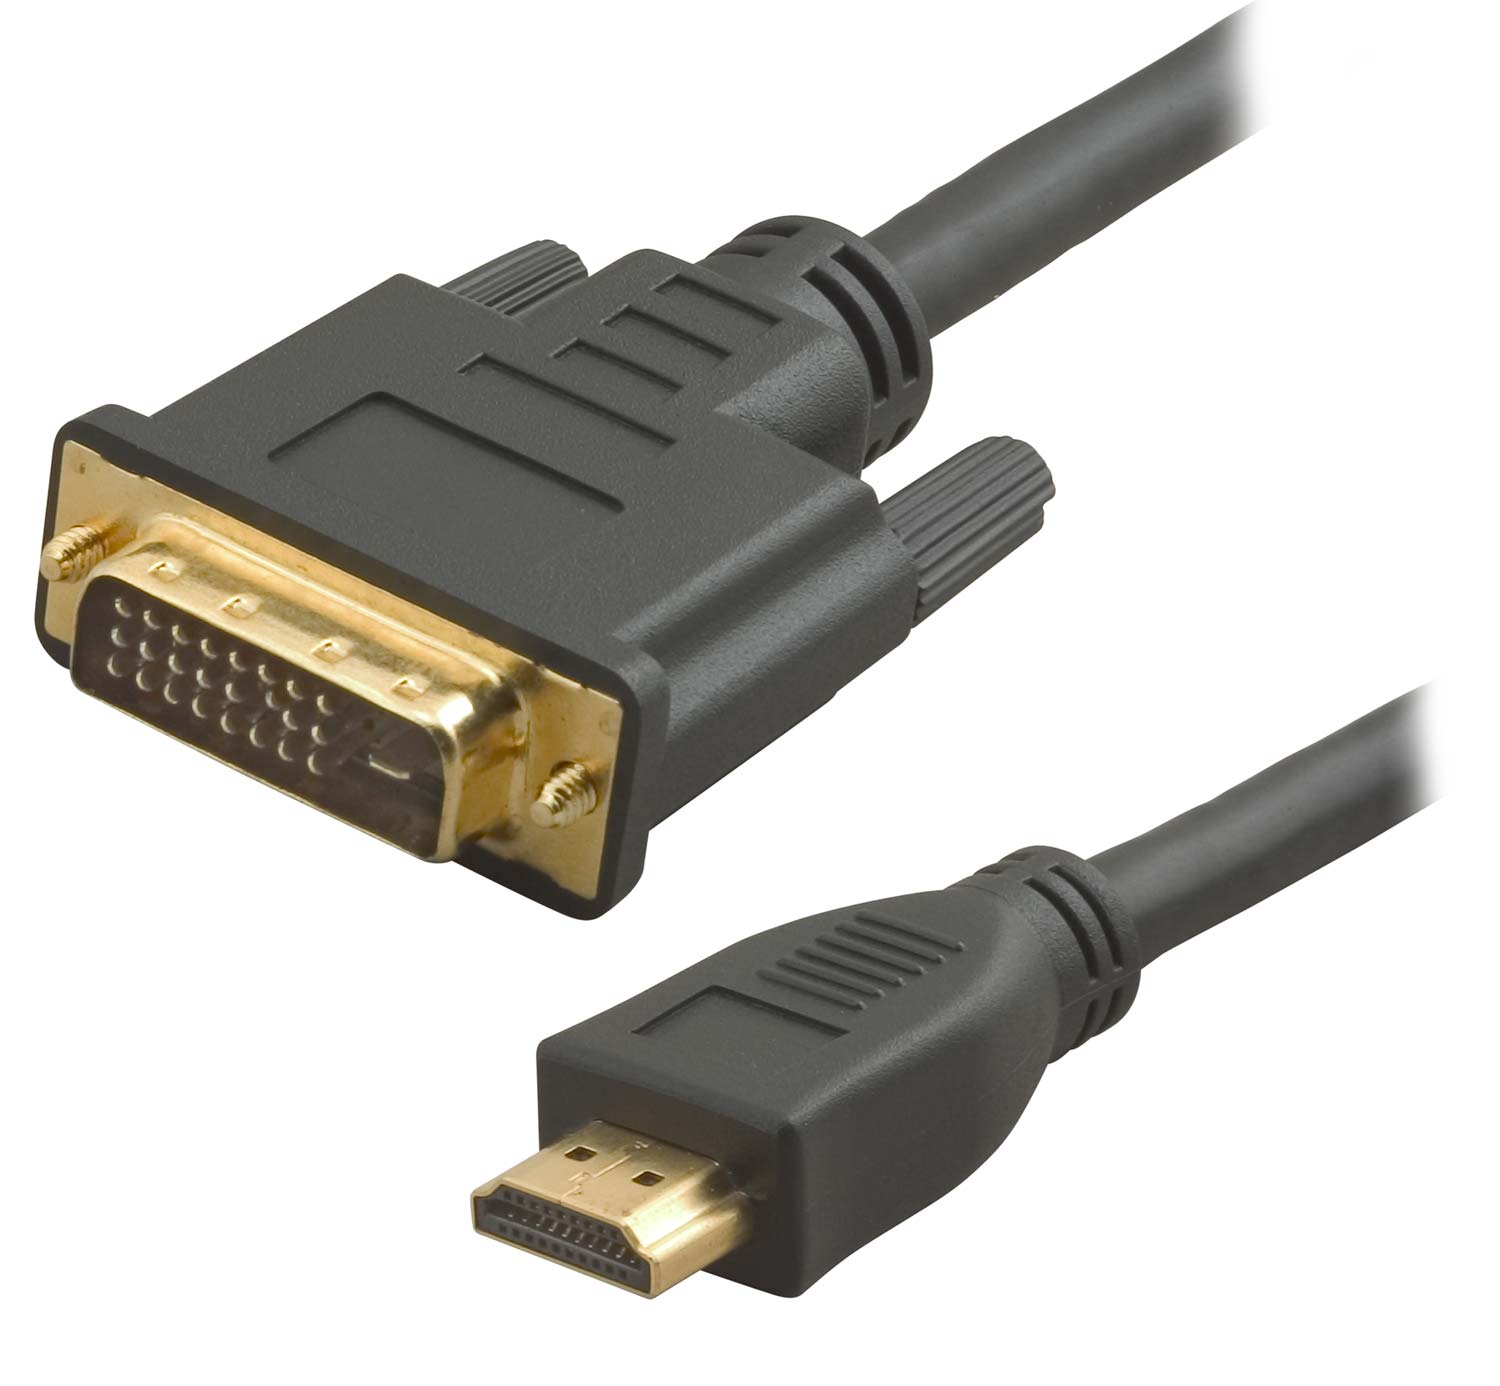 HD006: DVI-D to HDMI Converting Cable M/M, 6-ft